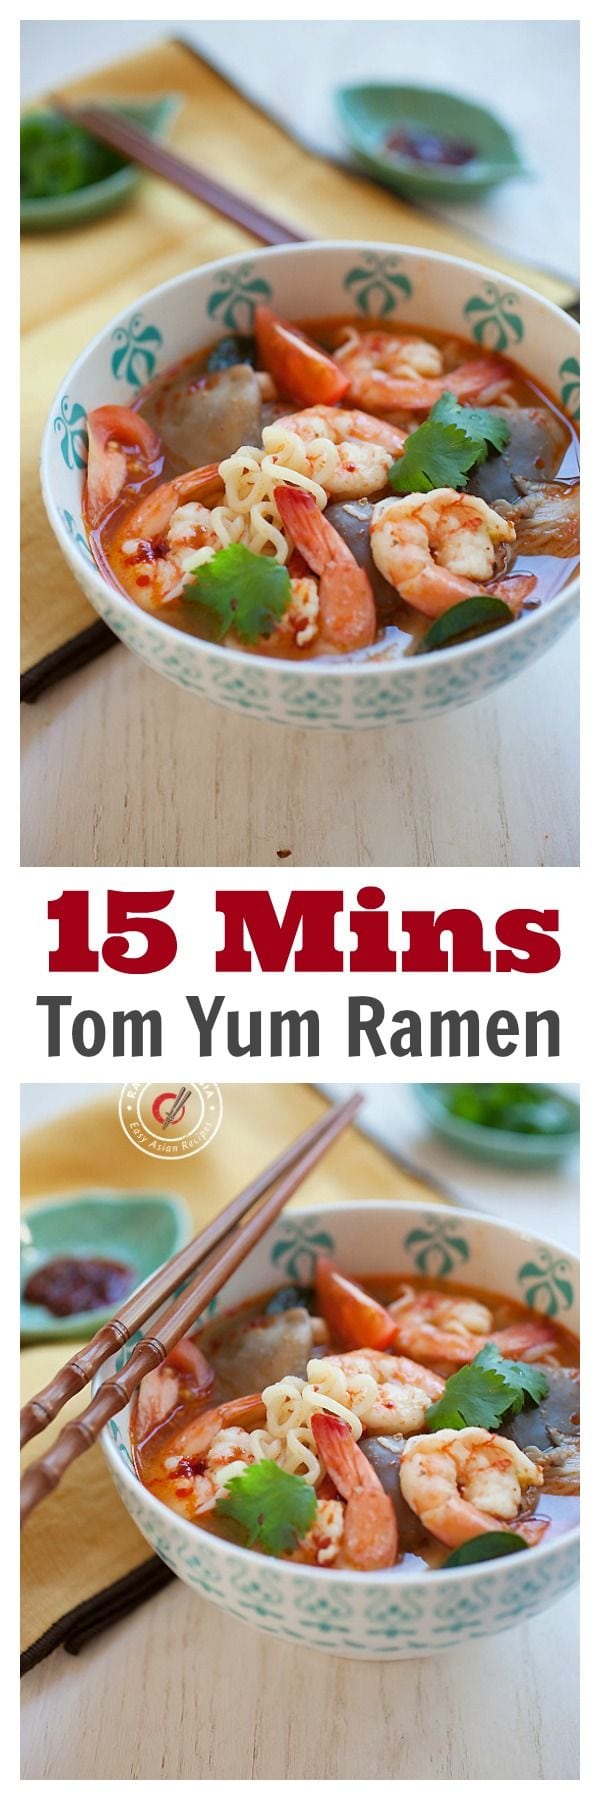 15-Minute Tom Yum Noodle Soup - not packaged ramen, but made from scratch, super EASY Thai Tom Yum Ramen. So GOOD | rasamalaysia.com